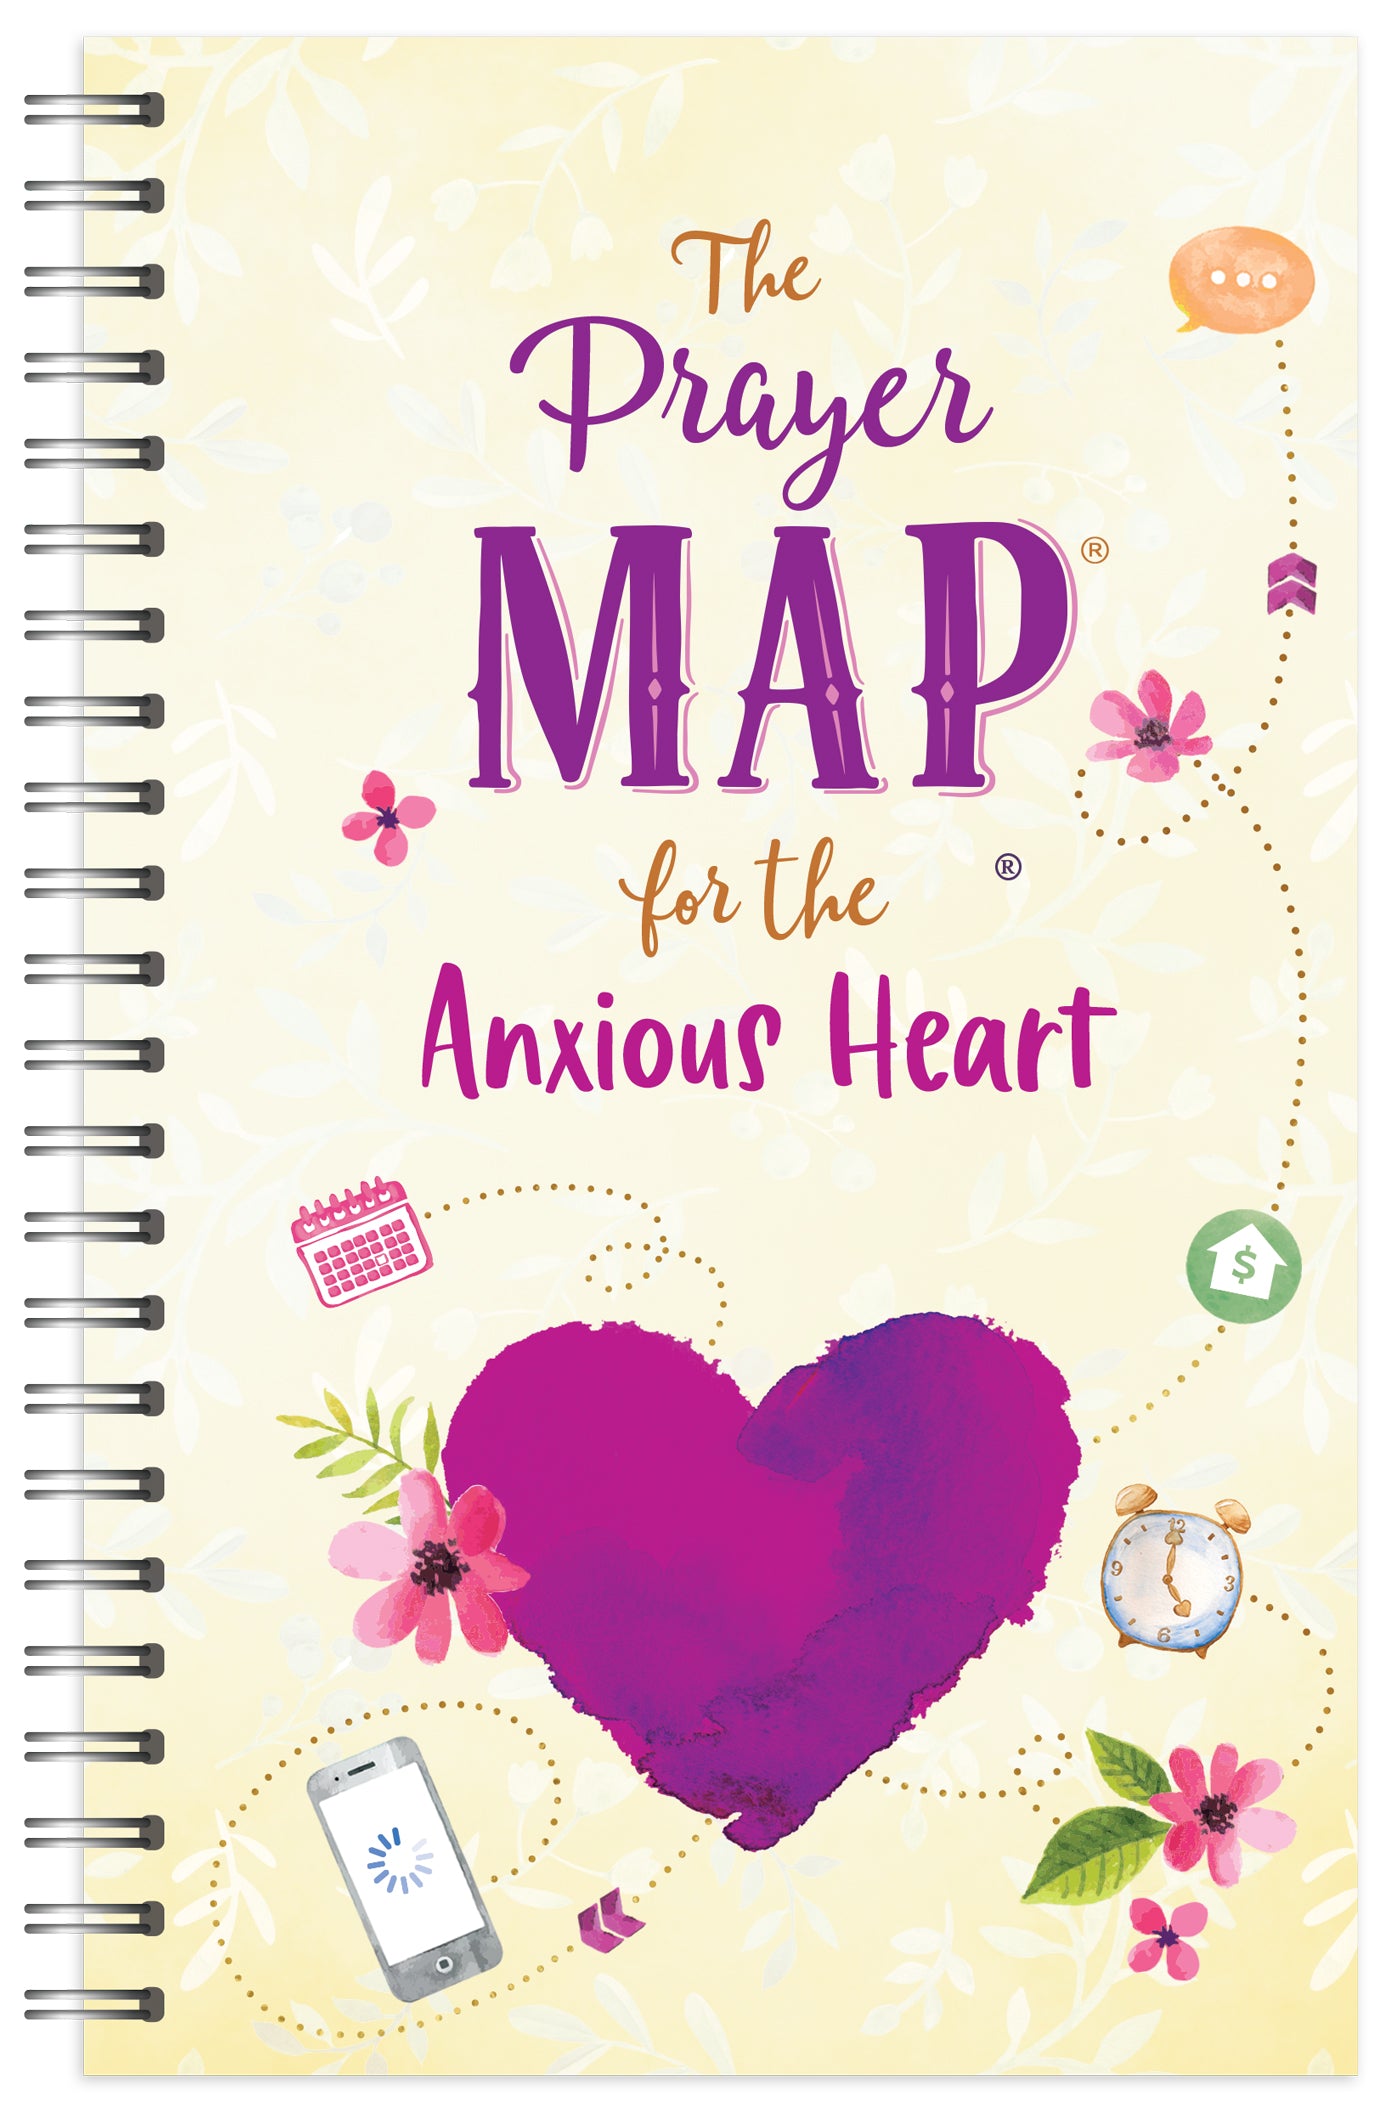 The Prayer Map® for the Anxious Heart - The Christian Gift Company